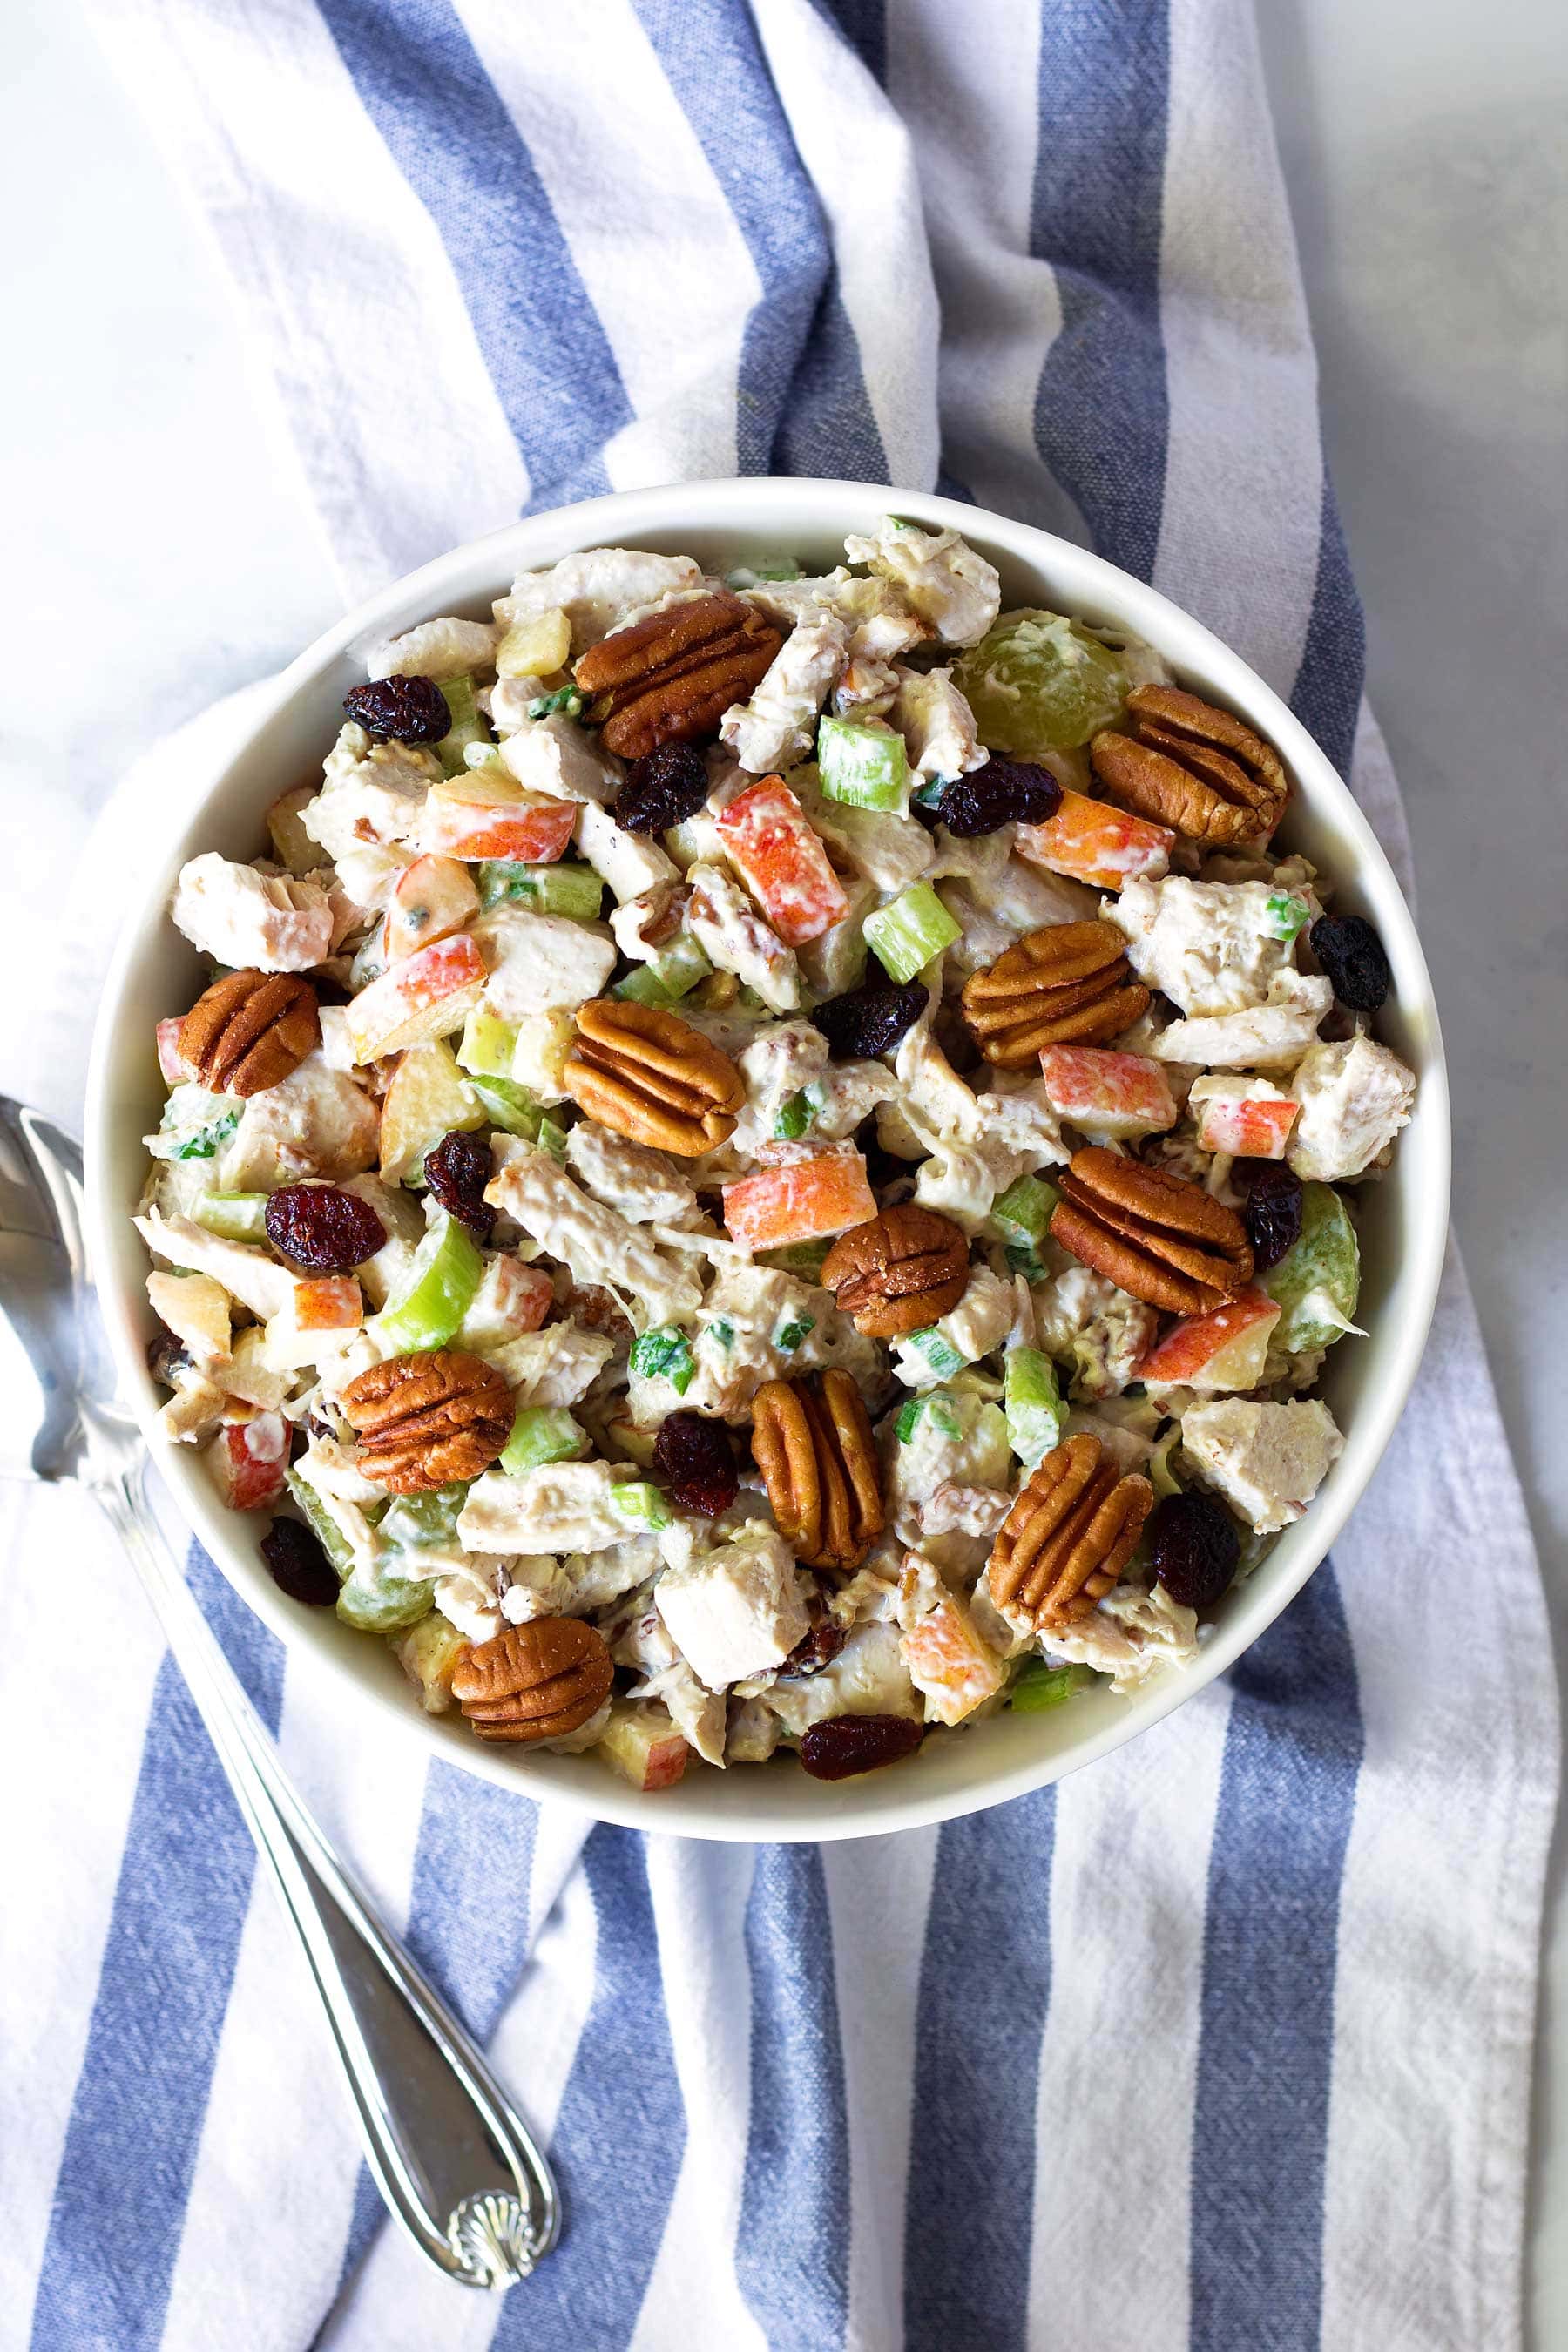 Use up your leftover turkey with this easy recipe! This Leftover Turkey Salad recipe is so simple to make, paleo, gluten free, Whole30, and can easily be made low carb and keto! 
#healthythanksgiving #healthychristmas #turkey #leftoverturkey #thanksgivingleftovers #christmasrecipes #jicama #apple #cranberries #crasins #pecans #glutenfreethanksgiving #glutenfree #ketothanksgiving #ketochristmas #lowcarbthanksgiving #lowcarbchristmas
